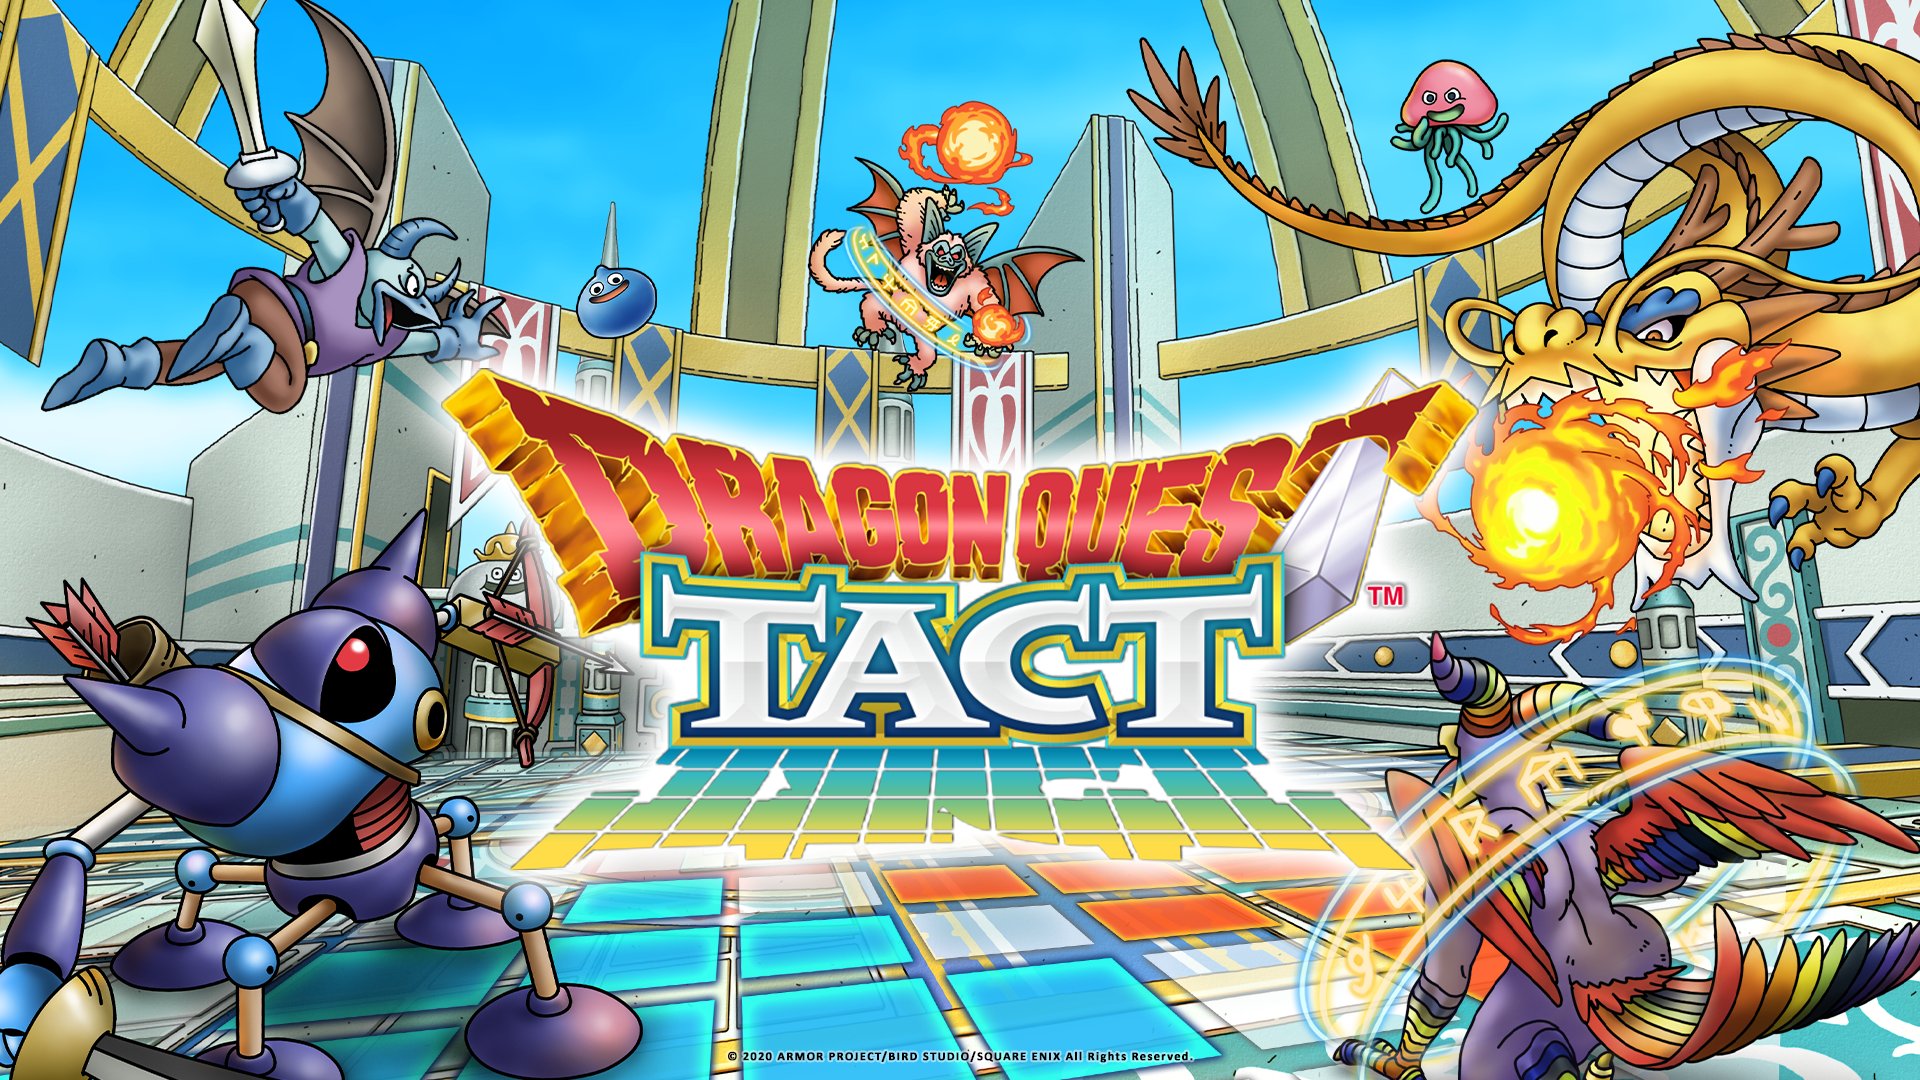 Tactical, Monster-Battling RPG Dragon Quest Tact Heads West for Smartphones